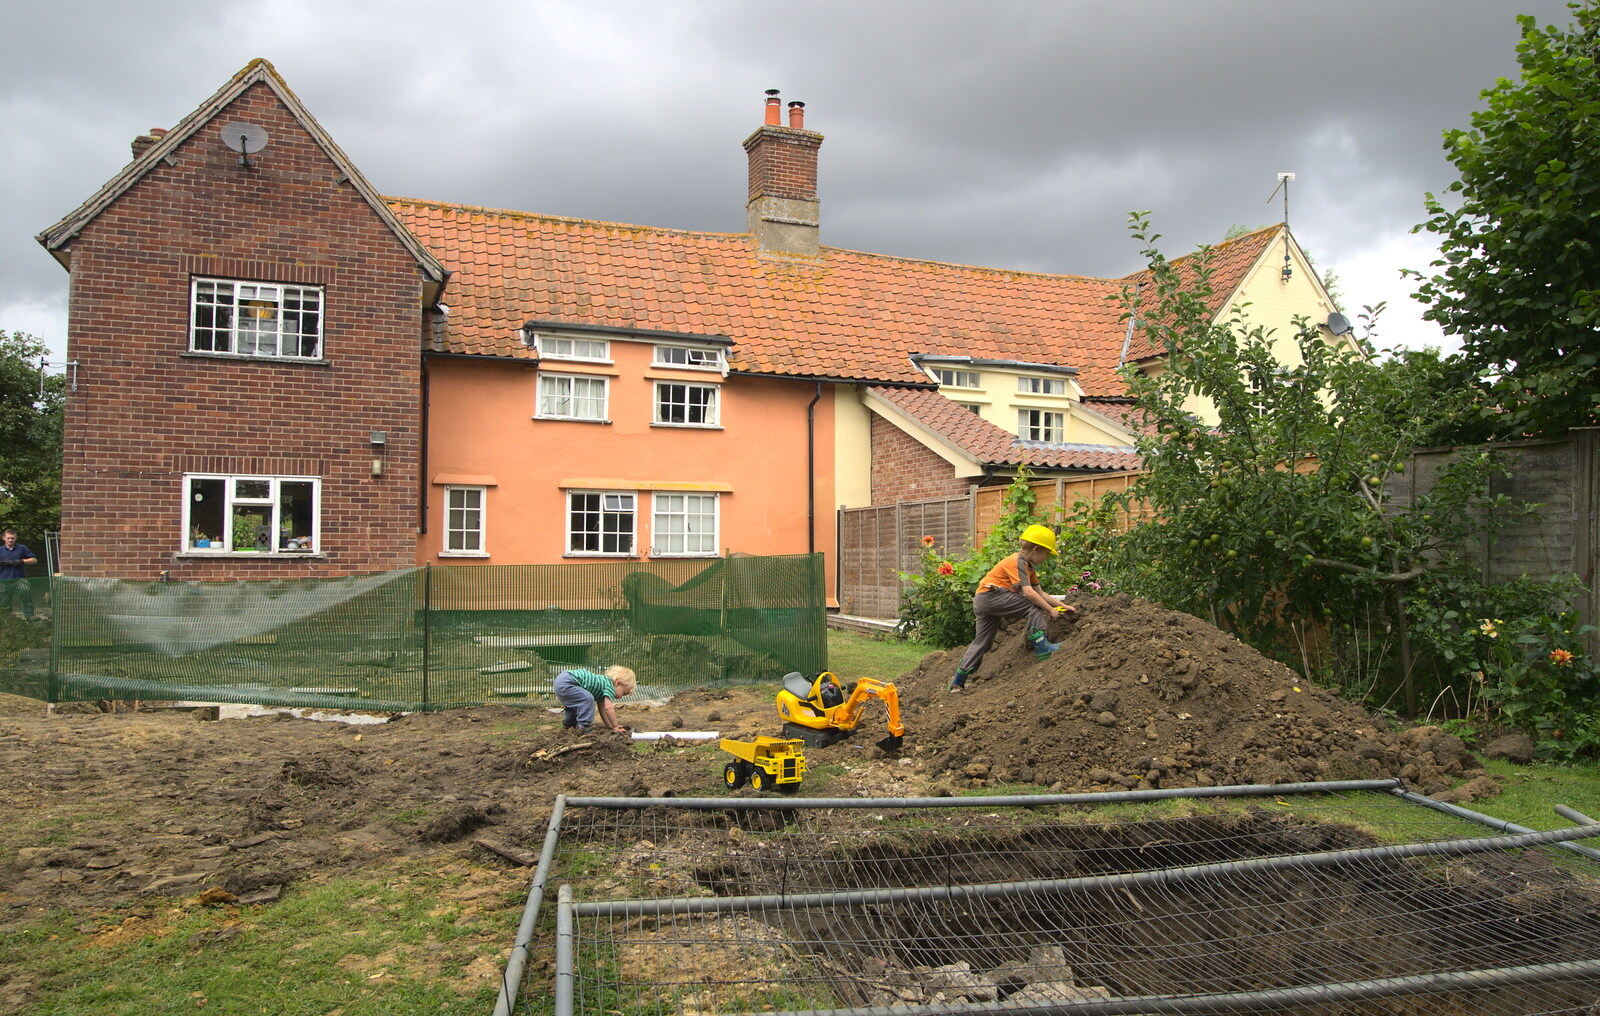 Harry and Fred play in the dirt from Grand Designs: Building Commences, Brome, Suffolk - 8th August 2013